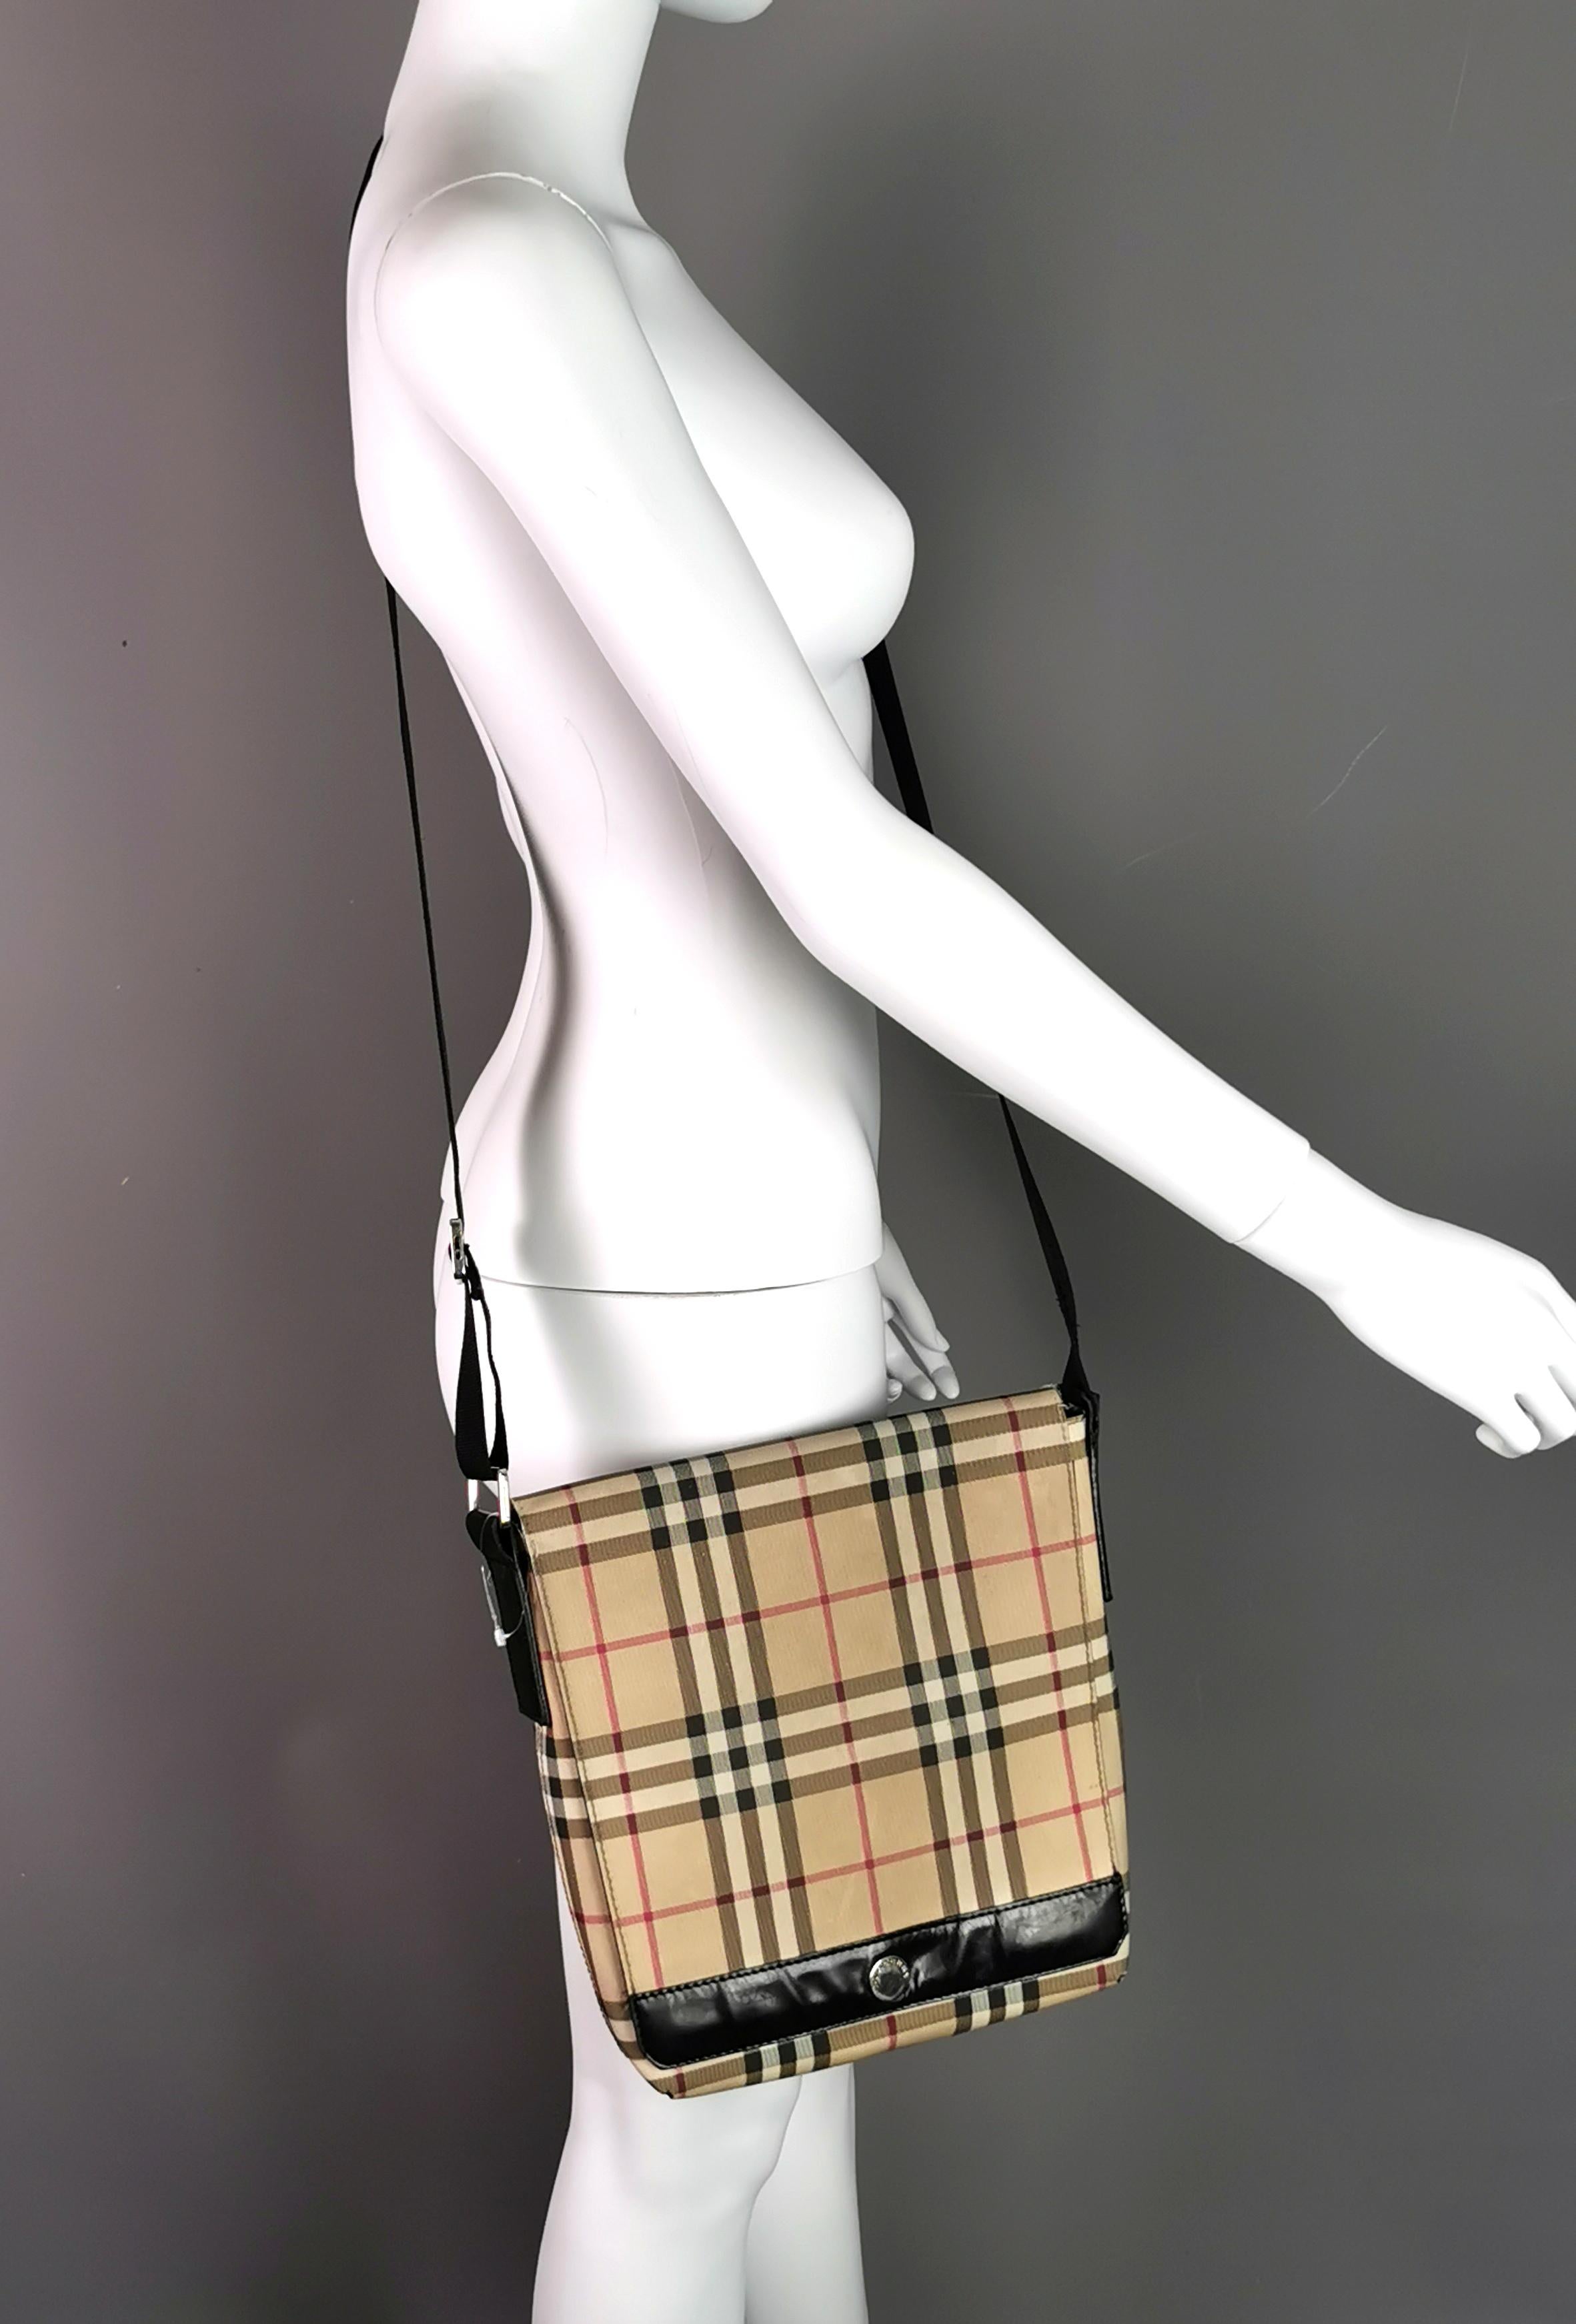 A stylish vintage Burberry Crossbody satchel or messenger type bag, can be worn over the shoulder or Crossbody.

Classic Nova check in a lightly coated canvas.

It has black webbing strap with woven branding and a leather strip to the front near the